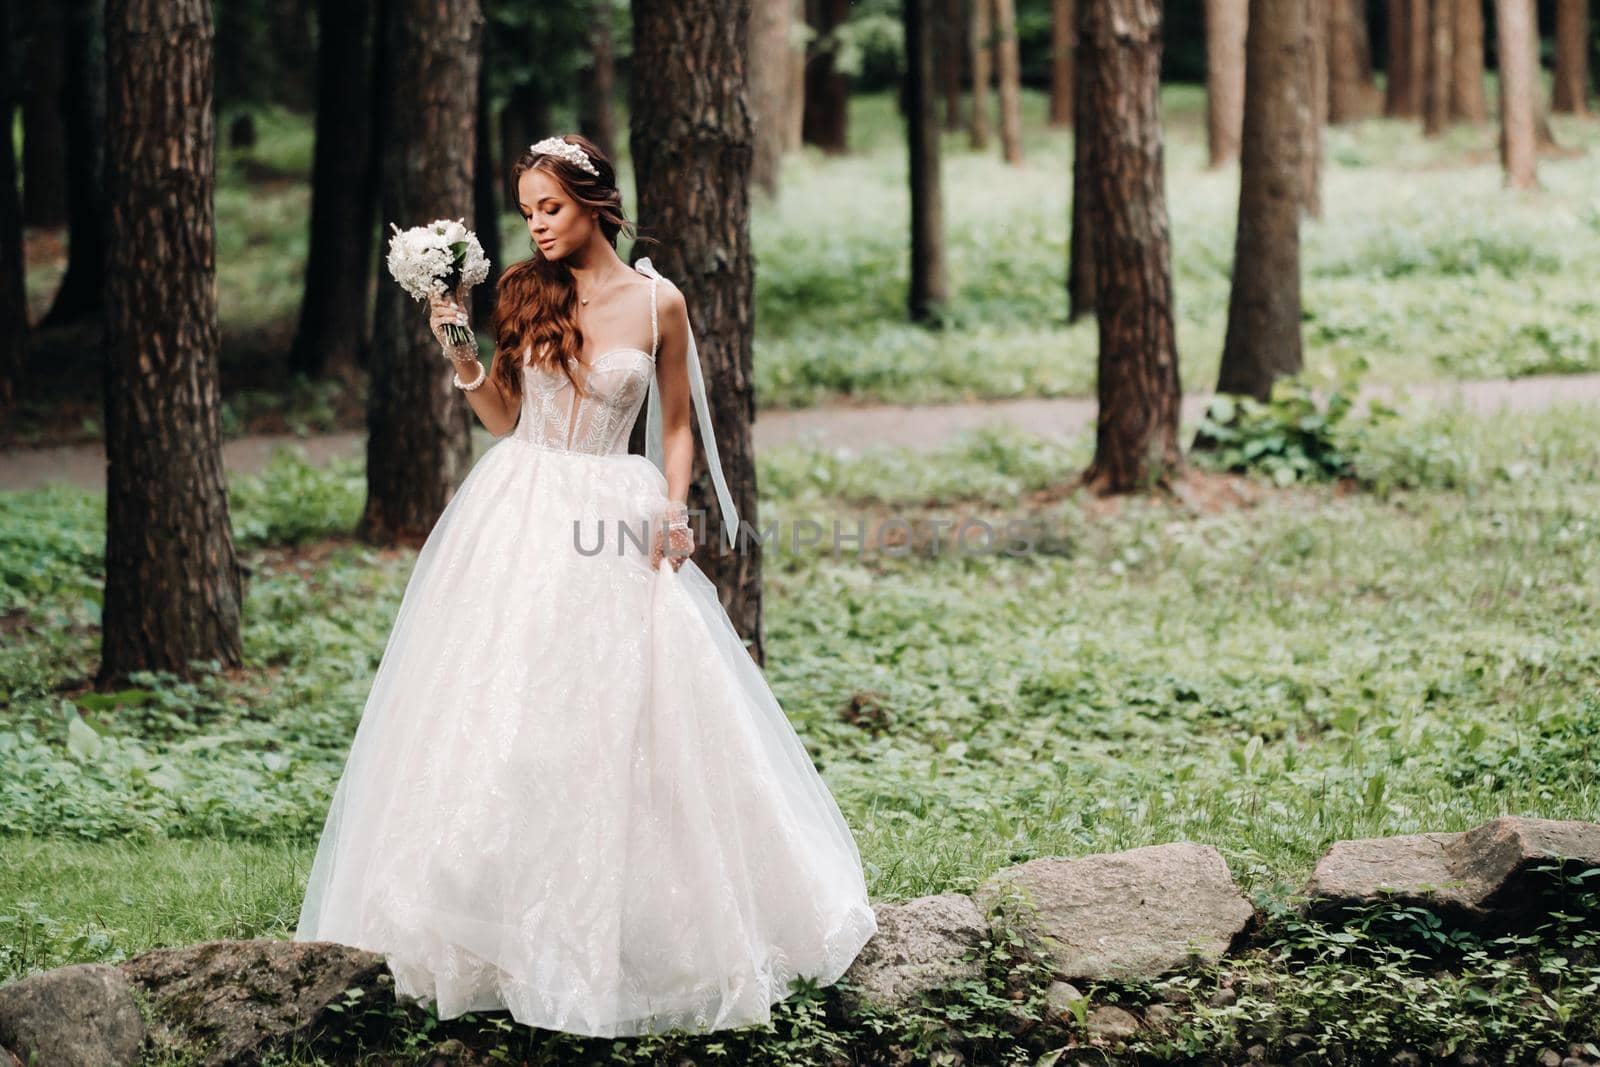 An elegant bride in a white dress and gloves holding a bouquet stands by a stream in the forest, enjoying nature.A model in a wedding dress and gloves in a nature Park.Belarus by Lobachad